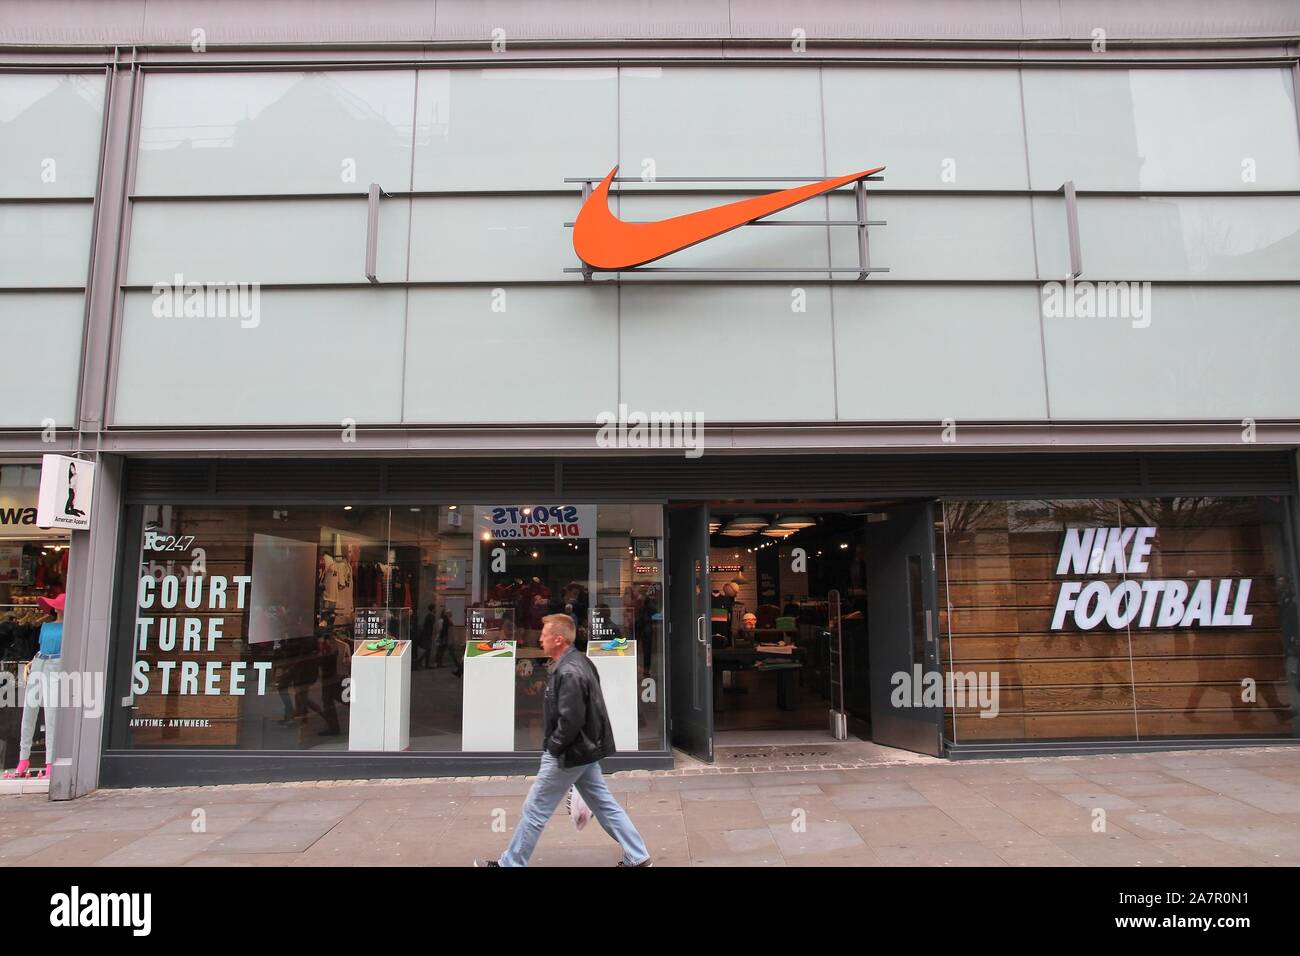 waterproof Productive Moronic nike store outlet murcia Proverb manager  Sculptor